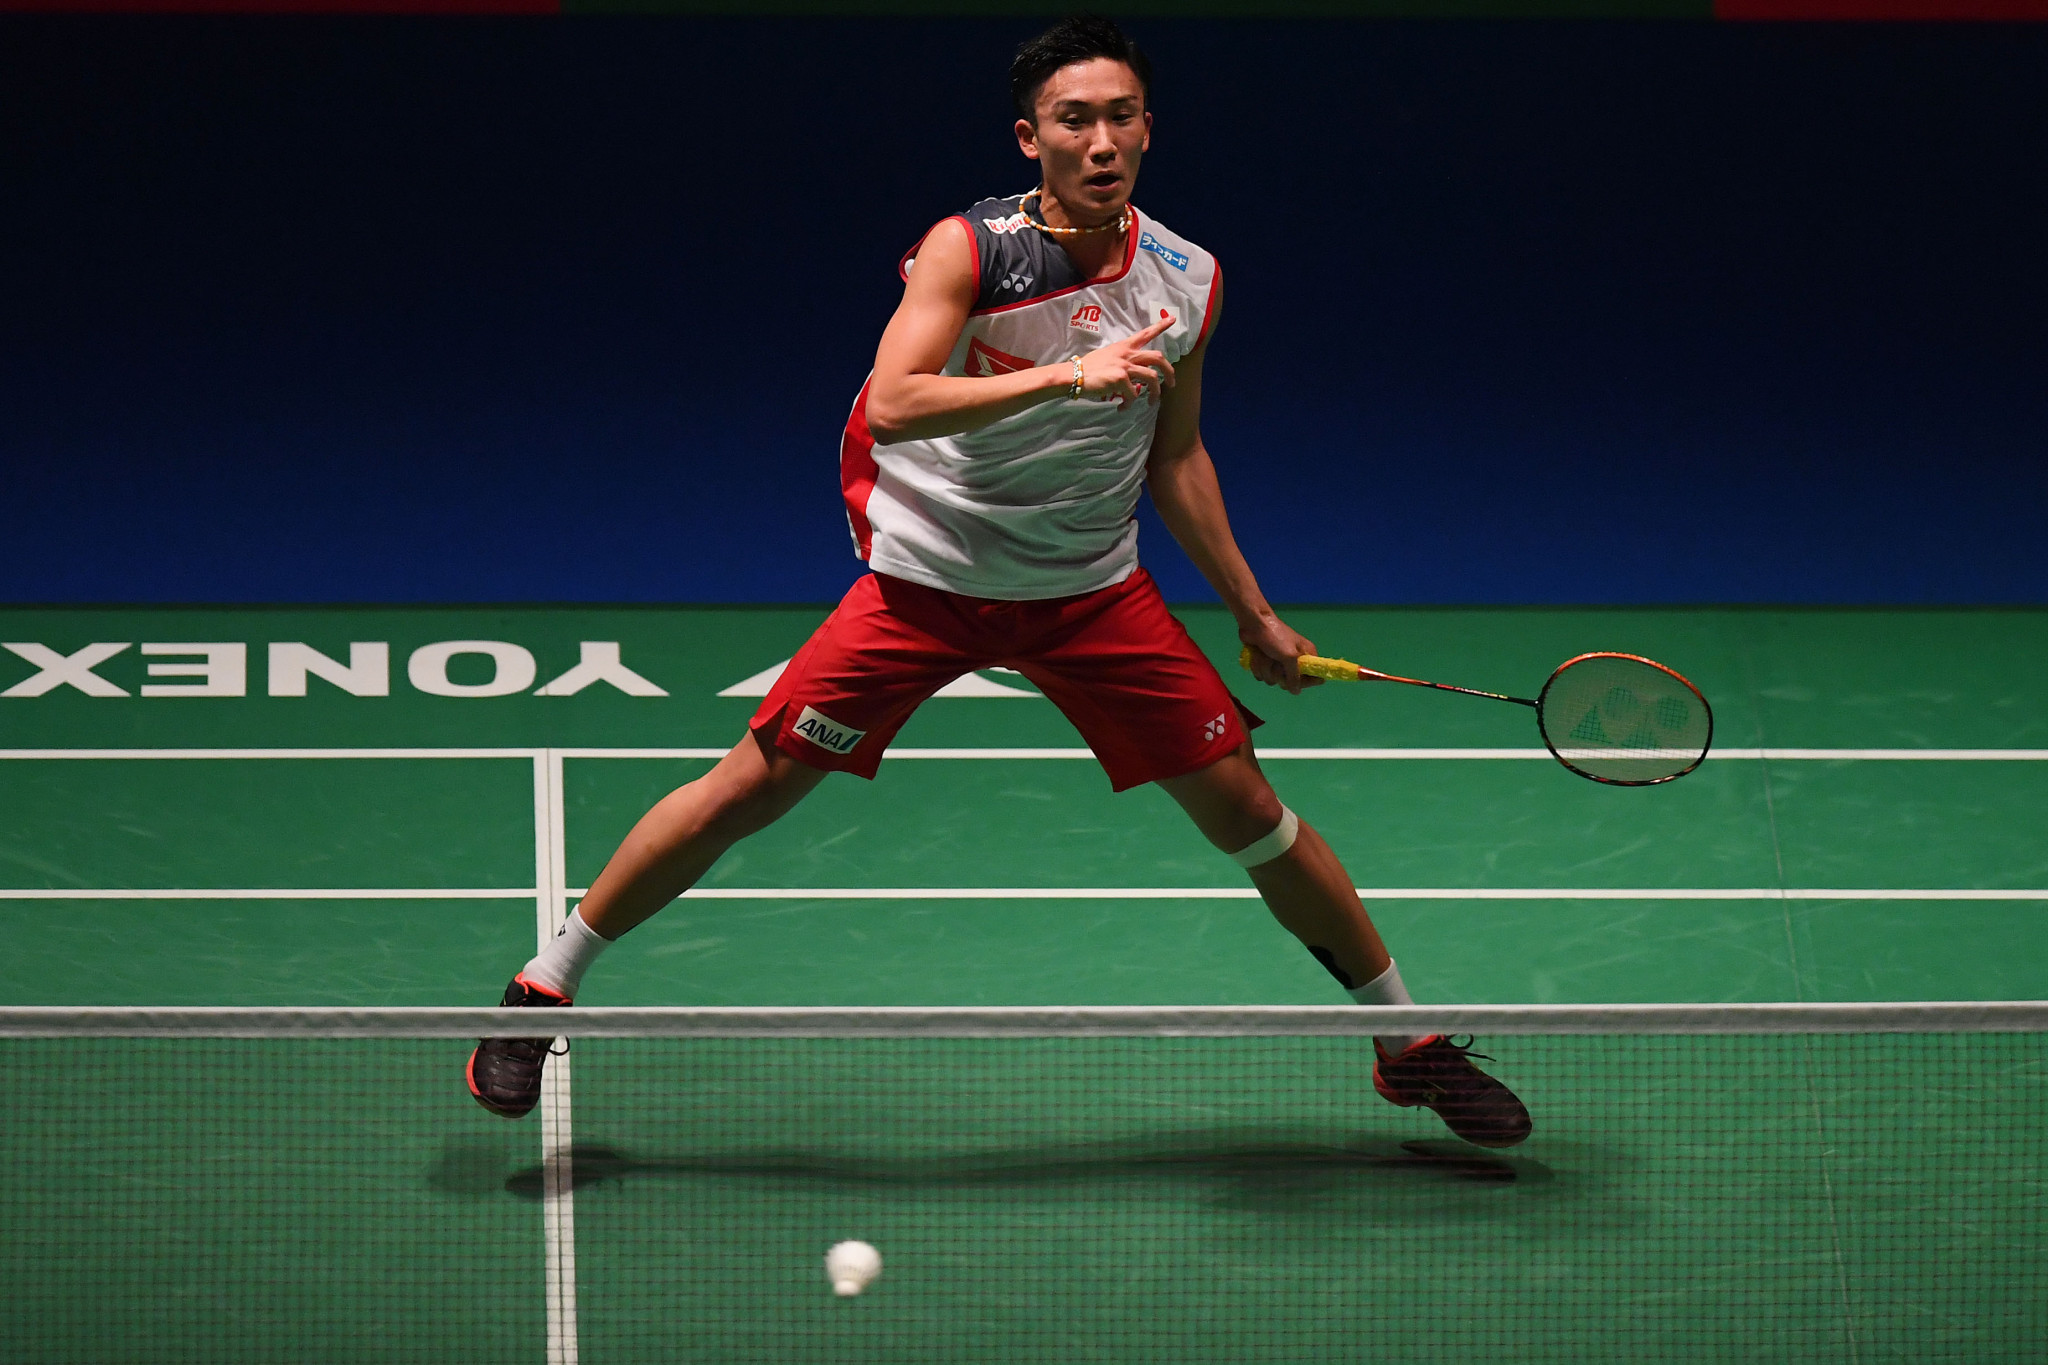 Home world champion Kento Momota en route to a Japan Open quarter-final win over China's double Olympic champion Lin Dan ©Getty Images  